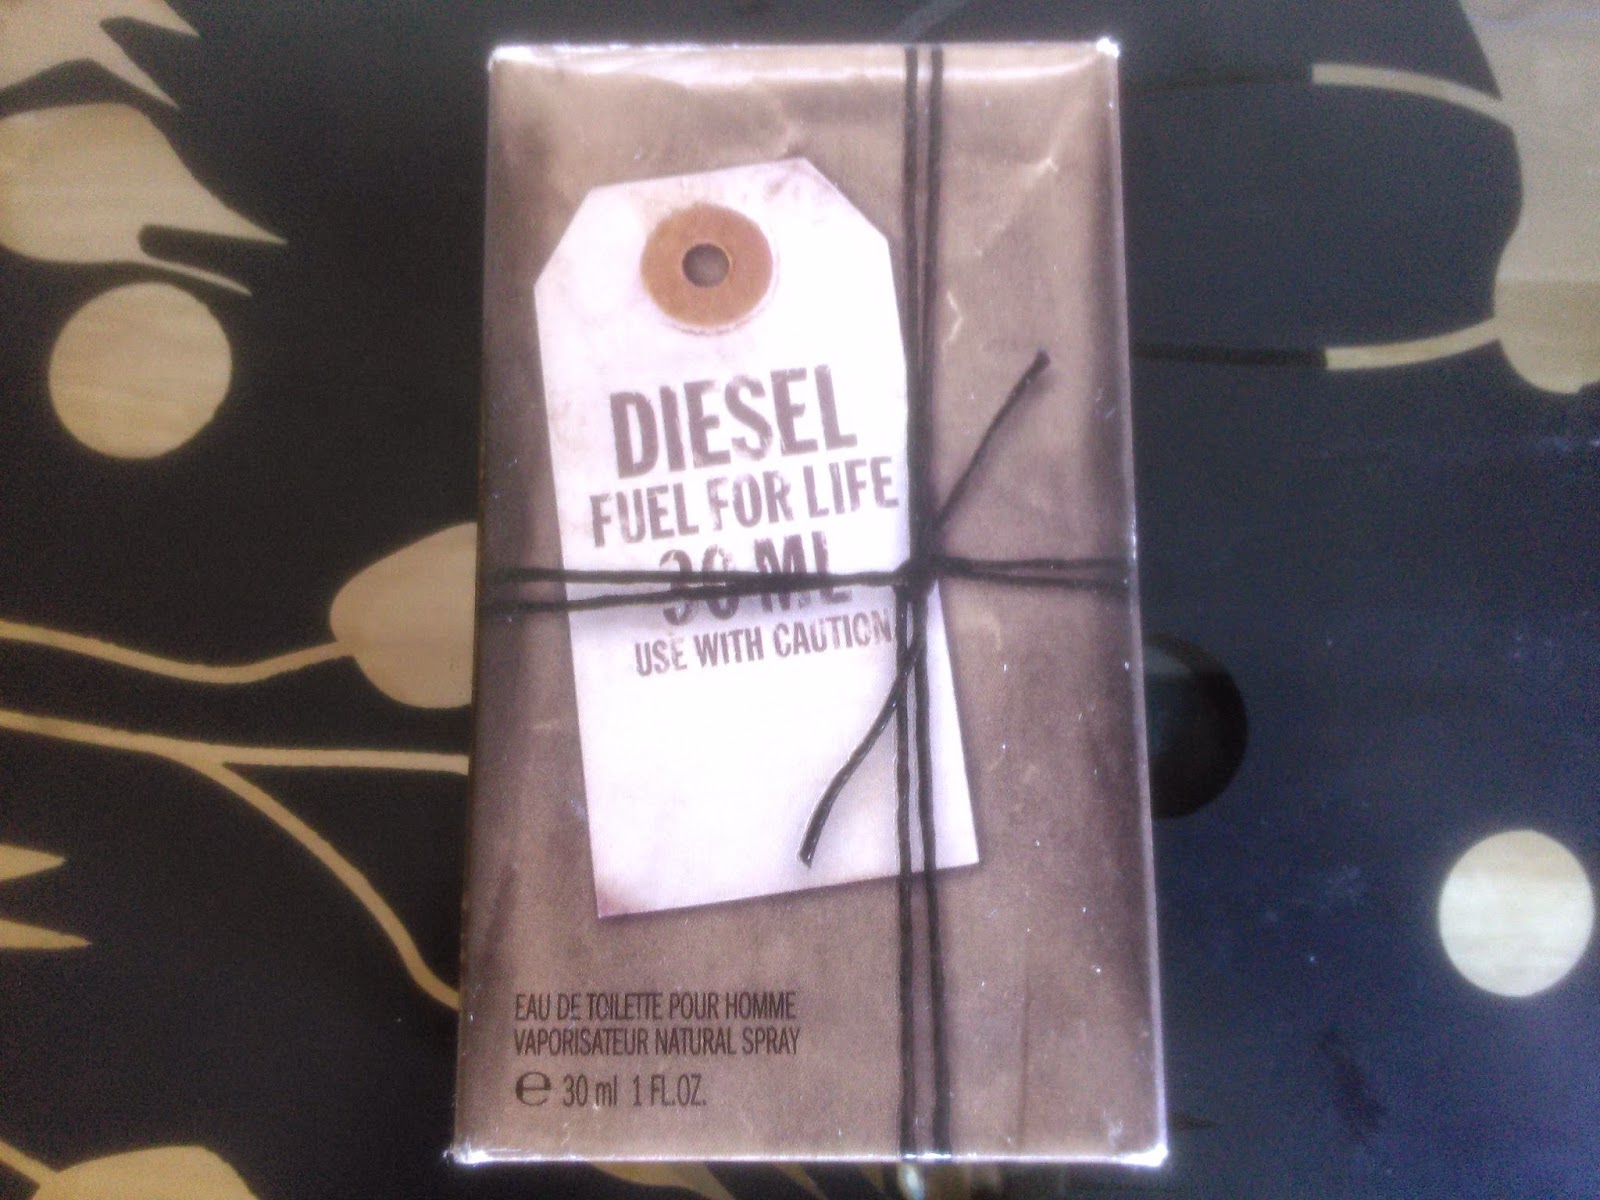 FUEL FOR LIFE, DIESEL